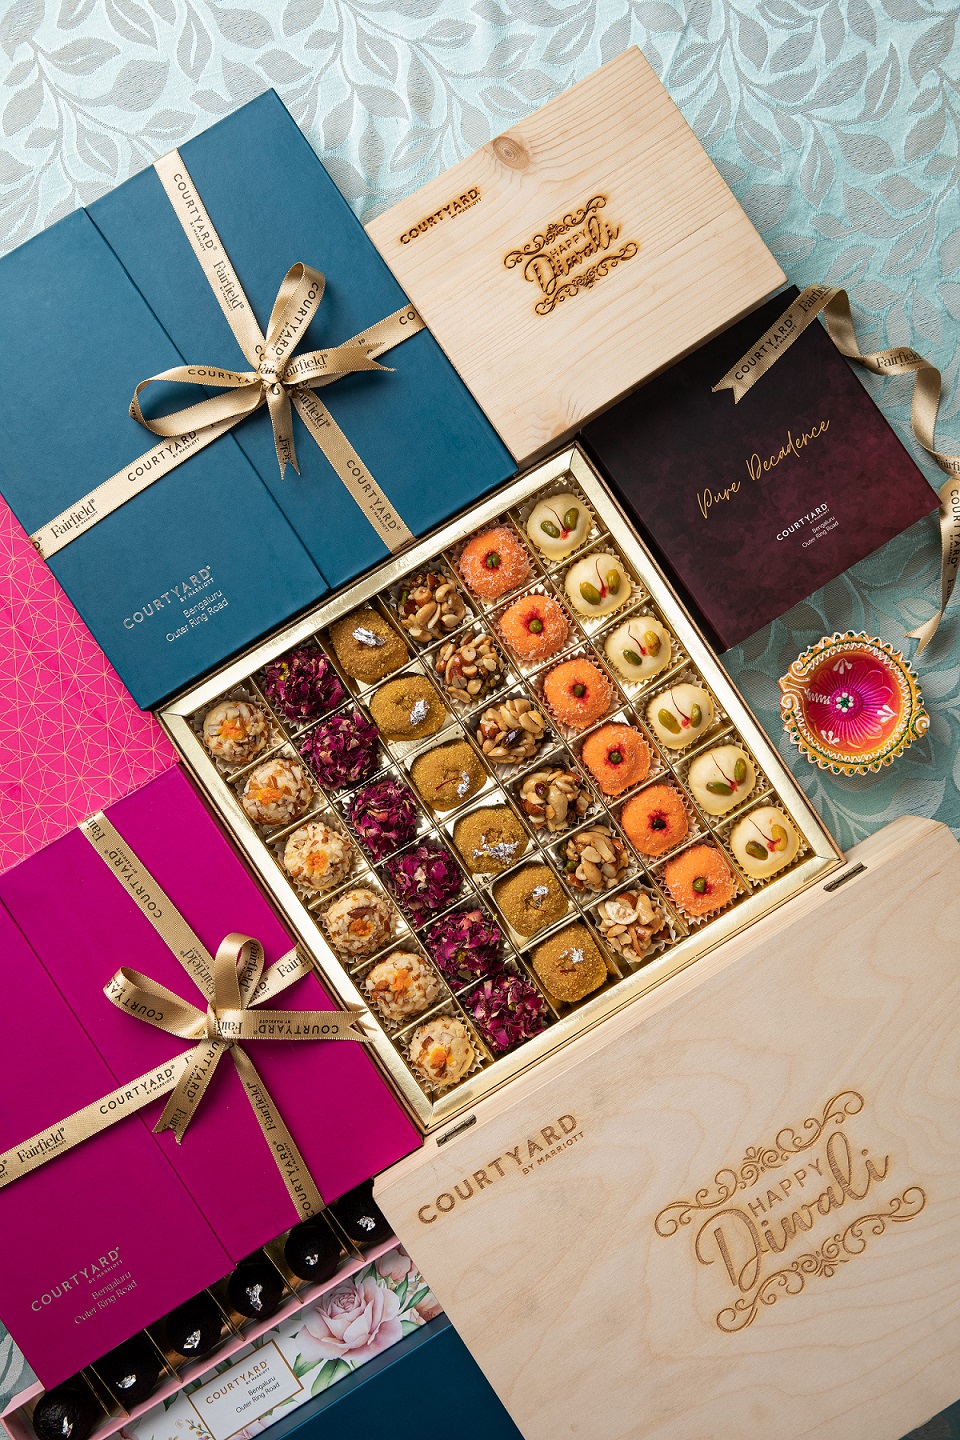  This Diwali, brighten your loved ones' day with an exquisite gift hamper from Courtyard by Marriott Bengaluru ORR